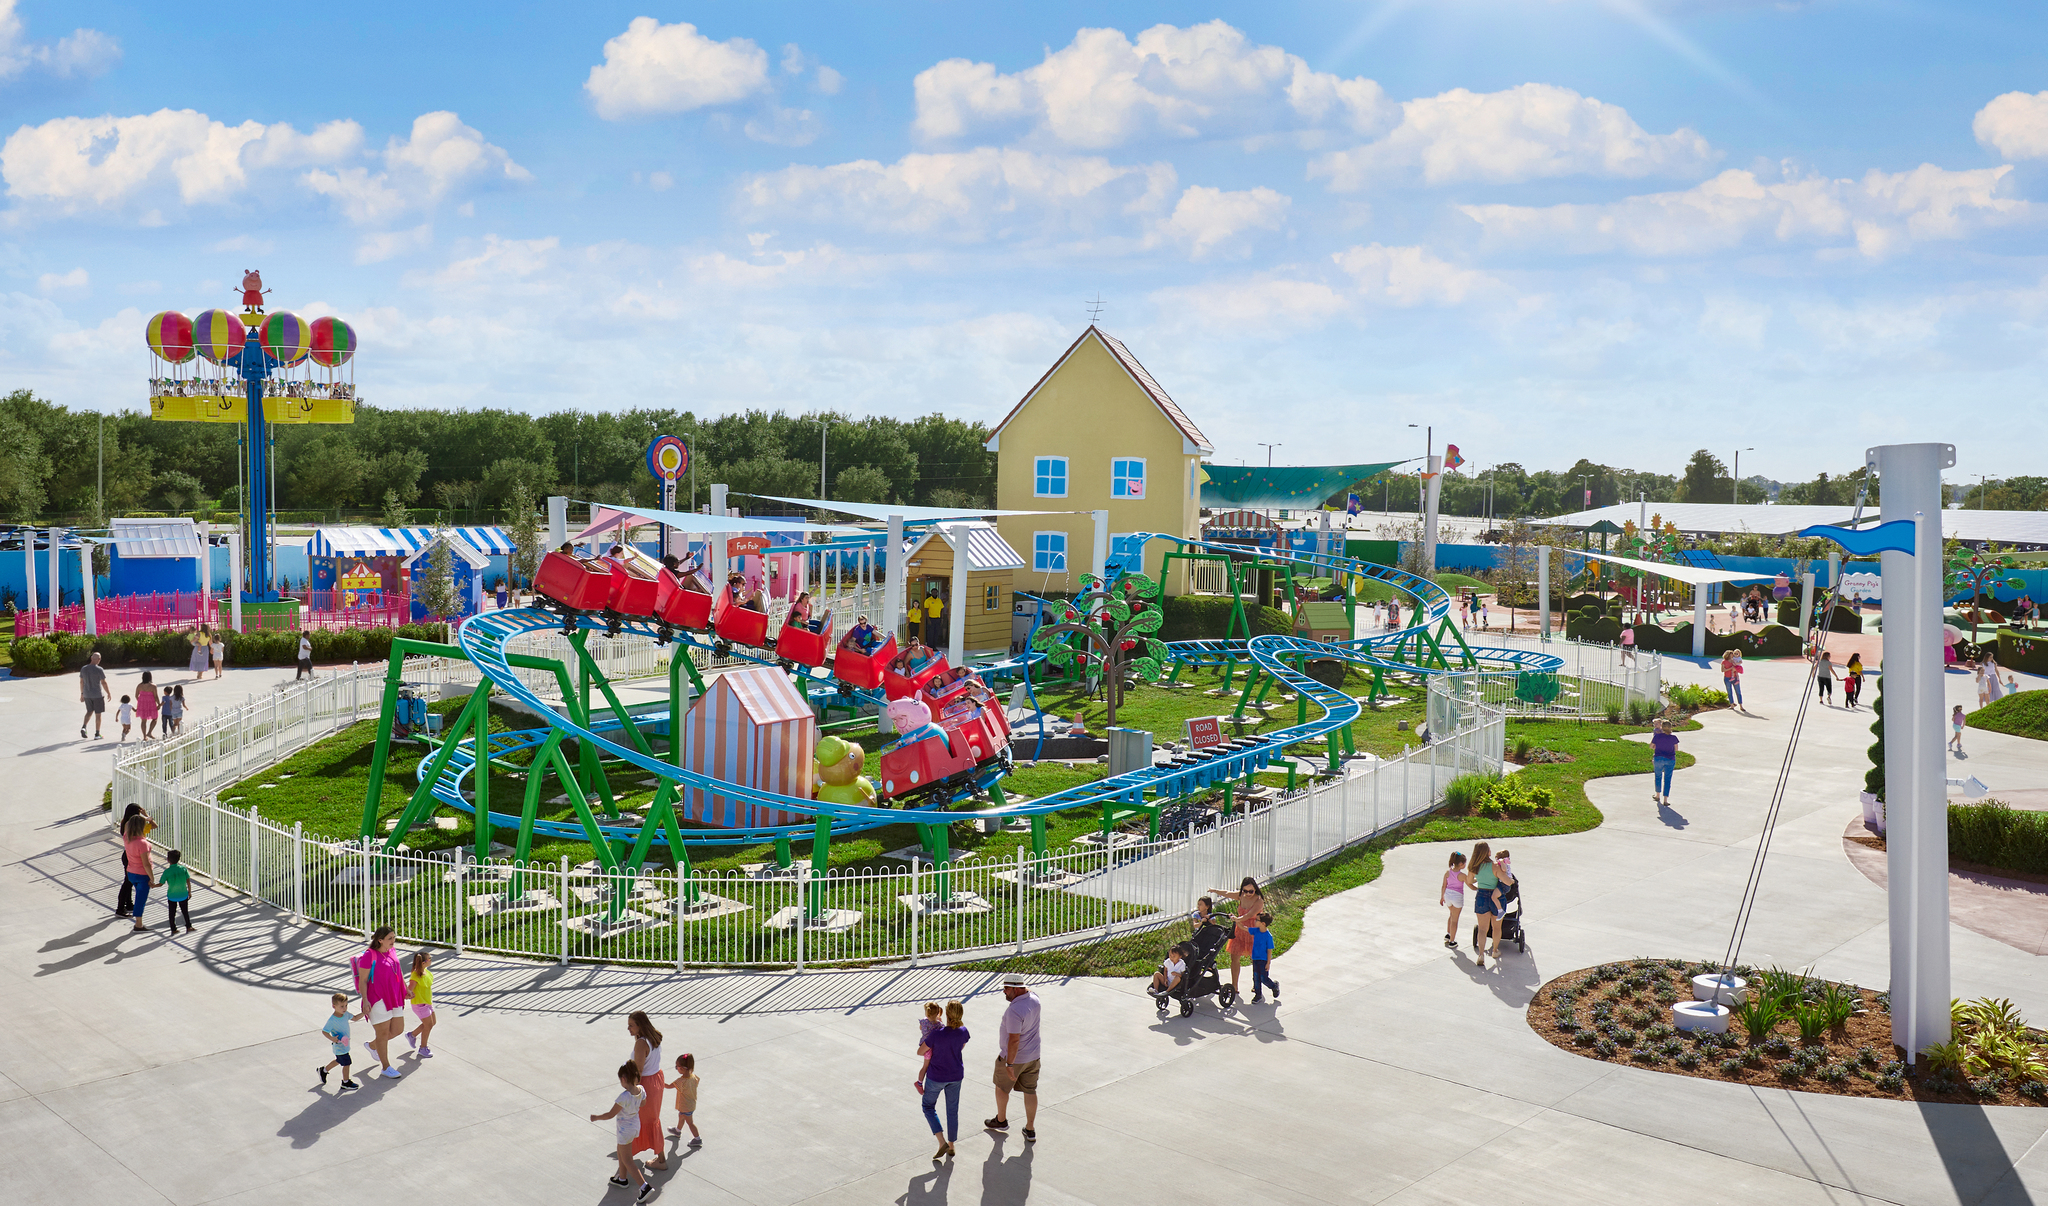 Overview of Peppa Pig Theme Park